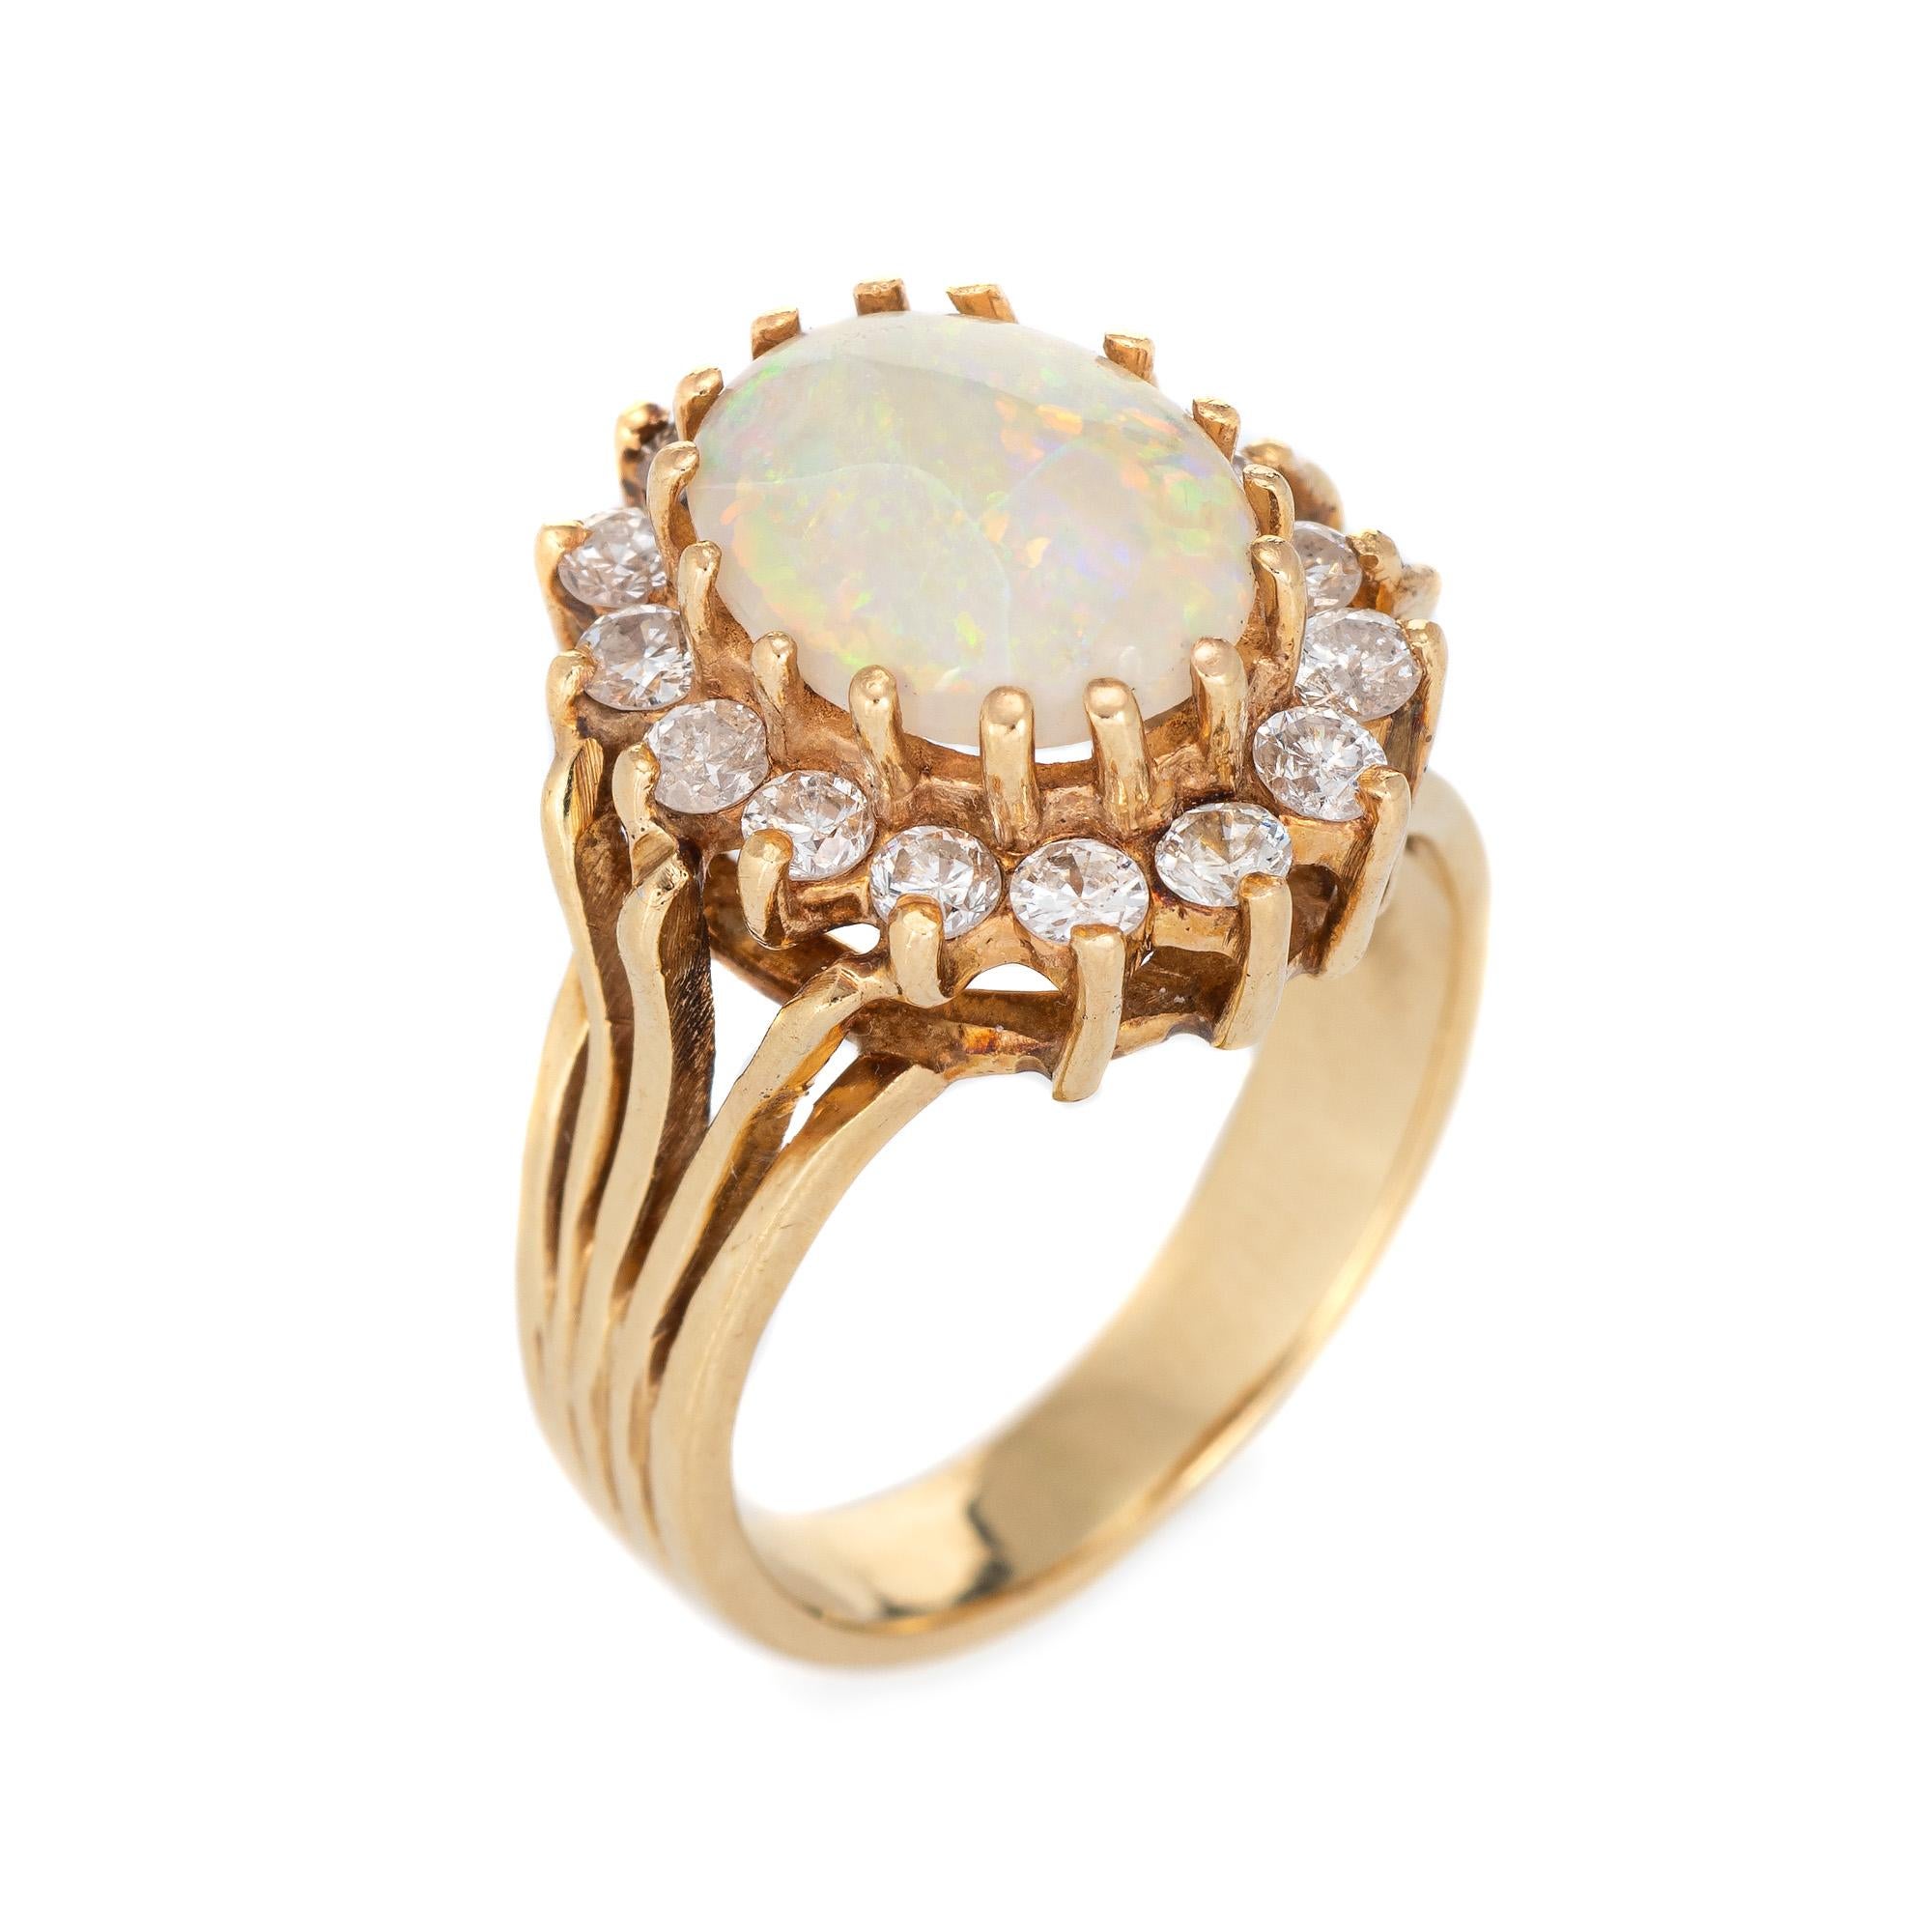 Stylish vintage natural opal & diamond cocktail ring (circa 1970s to 1980s) crafted in 14 karat yellow gold. 

Cabochon cut natural opal measures 10mm x 7.8mm (estimated at 1.45 carats) is accented with an estimated 0.45 carats of diamonds